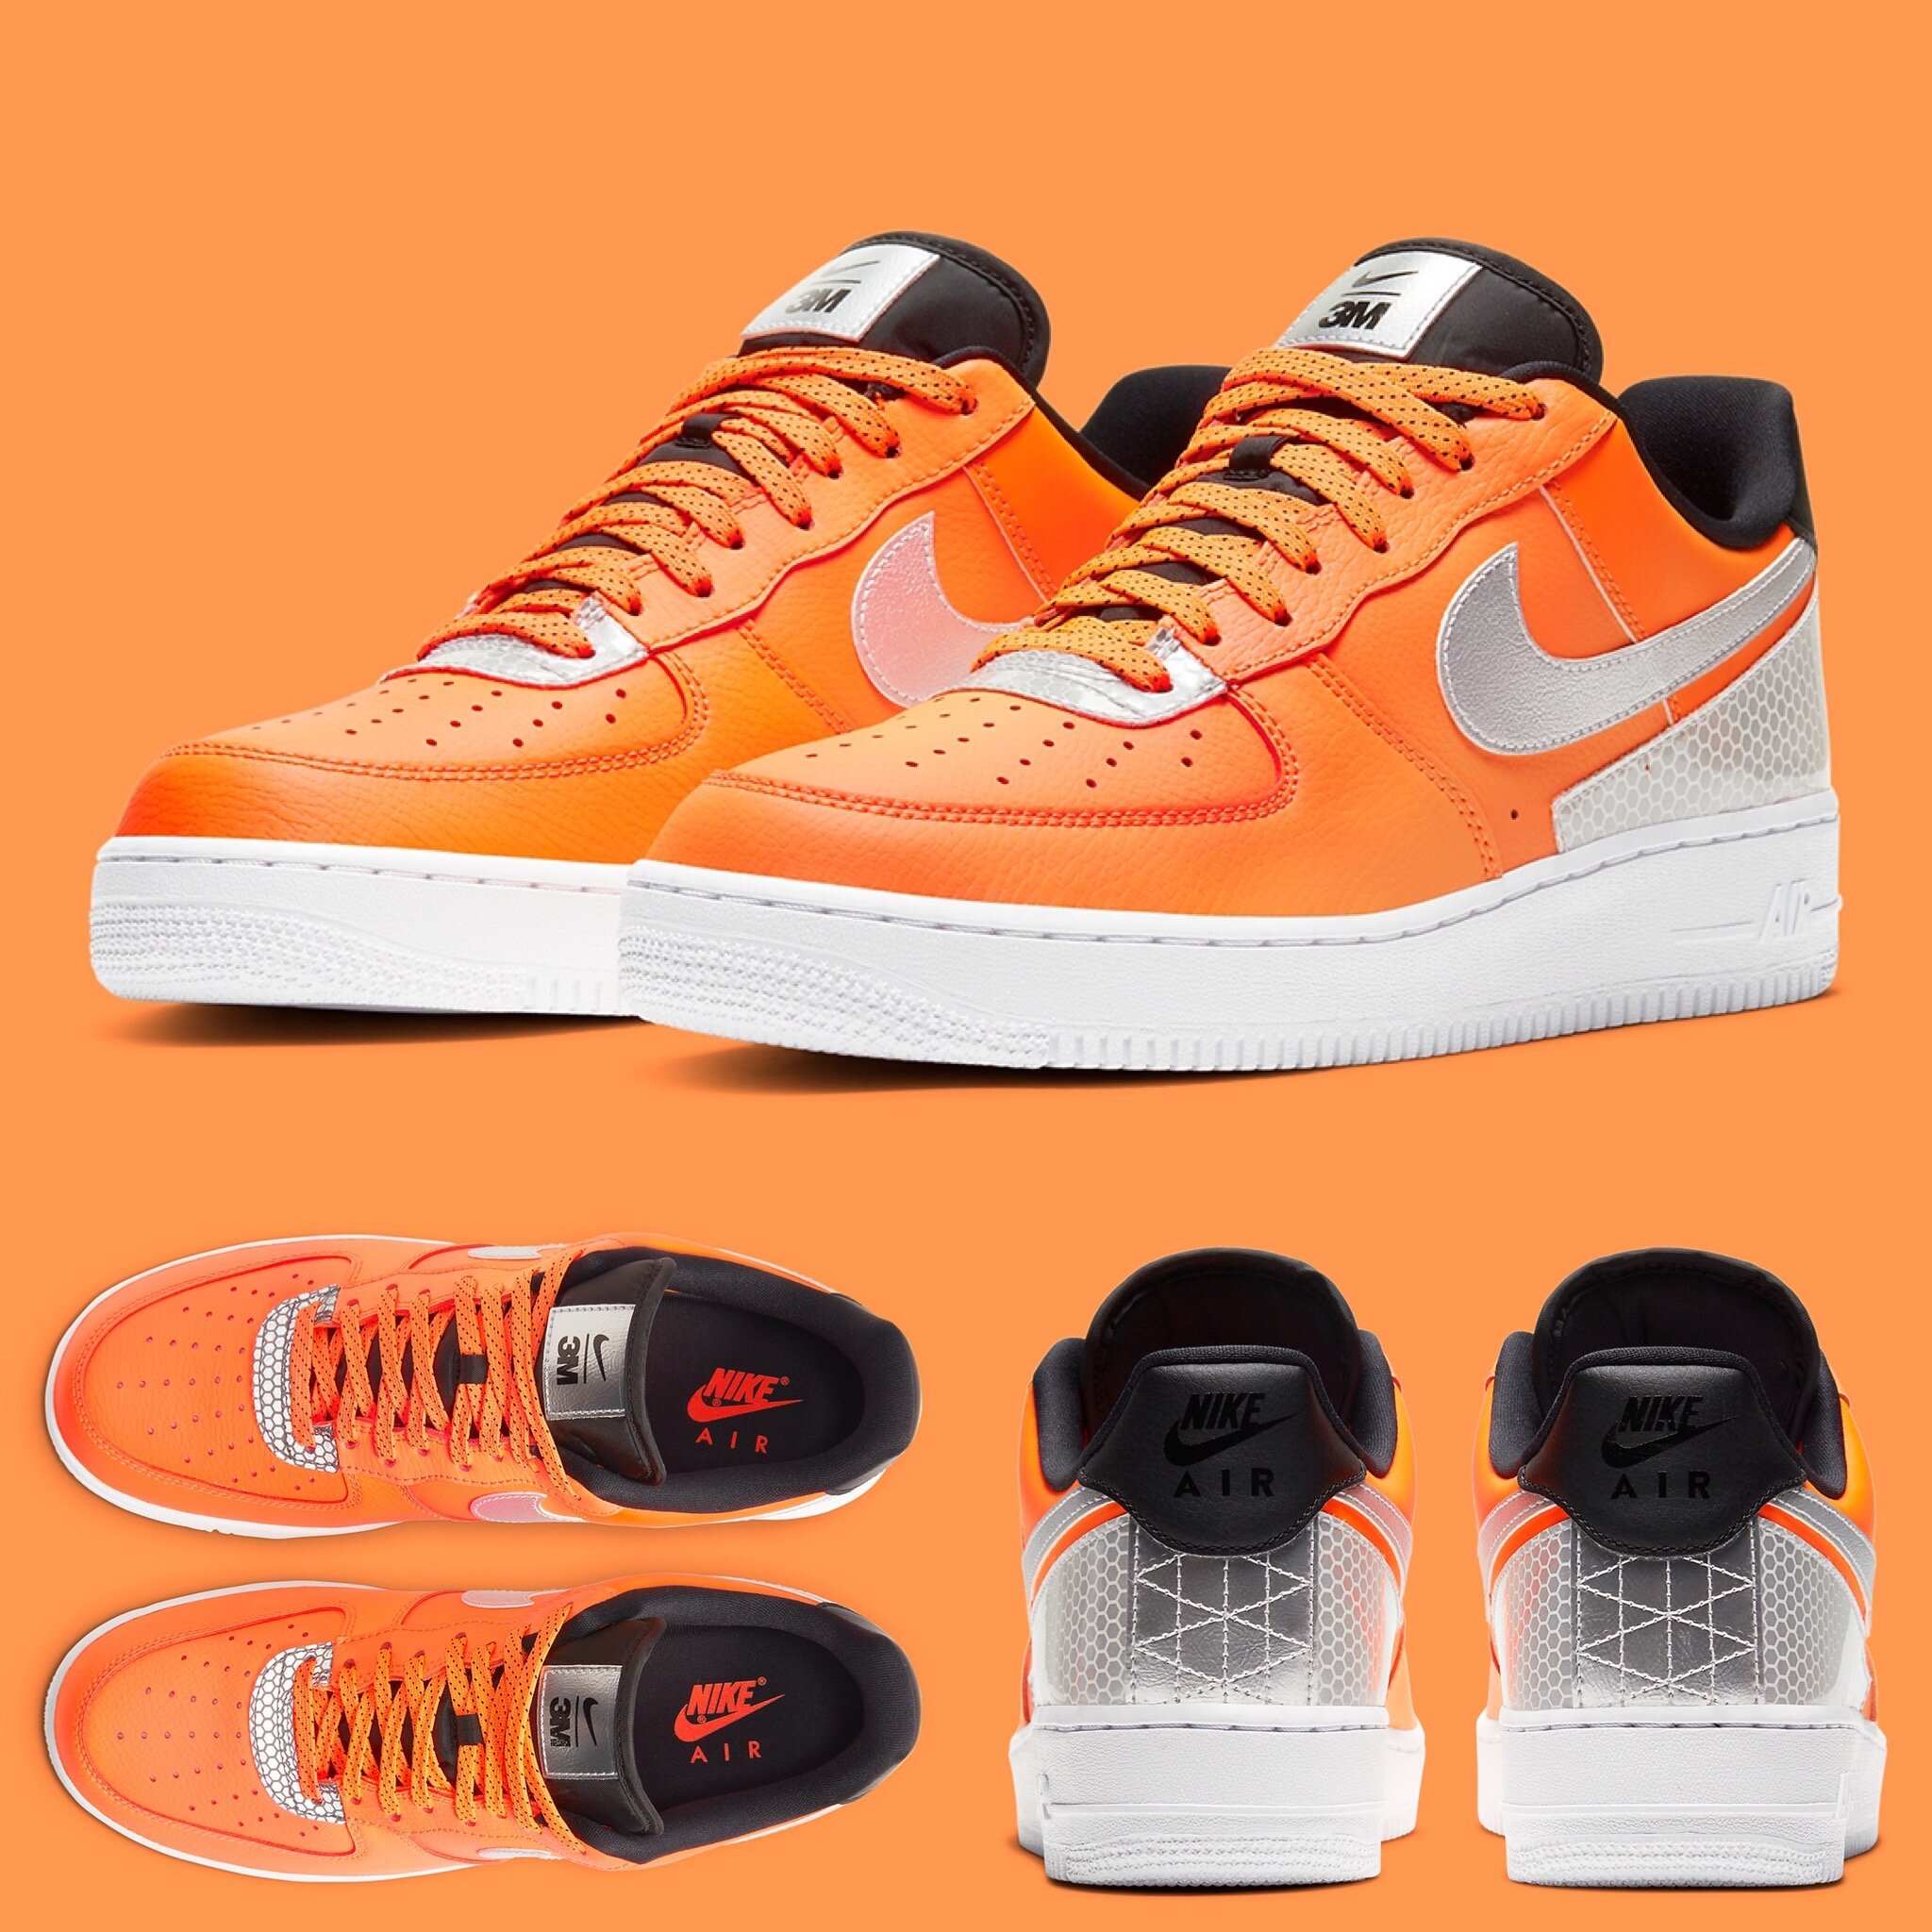 Now Available: 3M x Nike Air Force 1 Low 